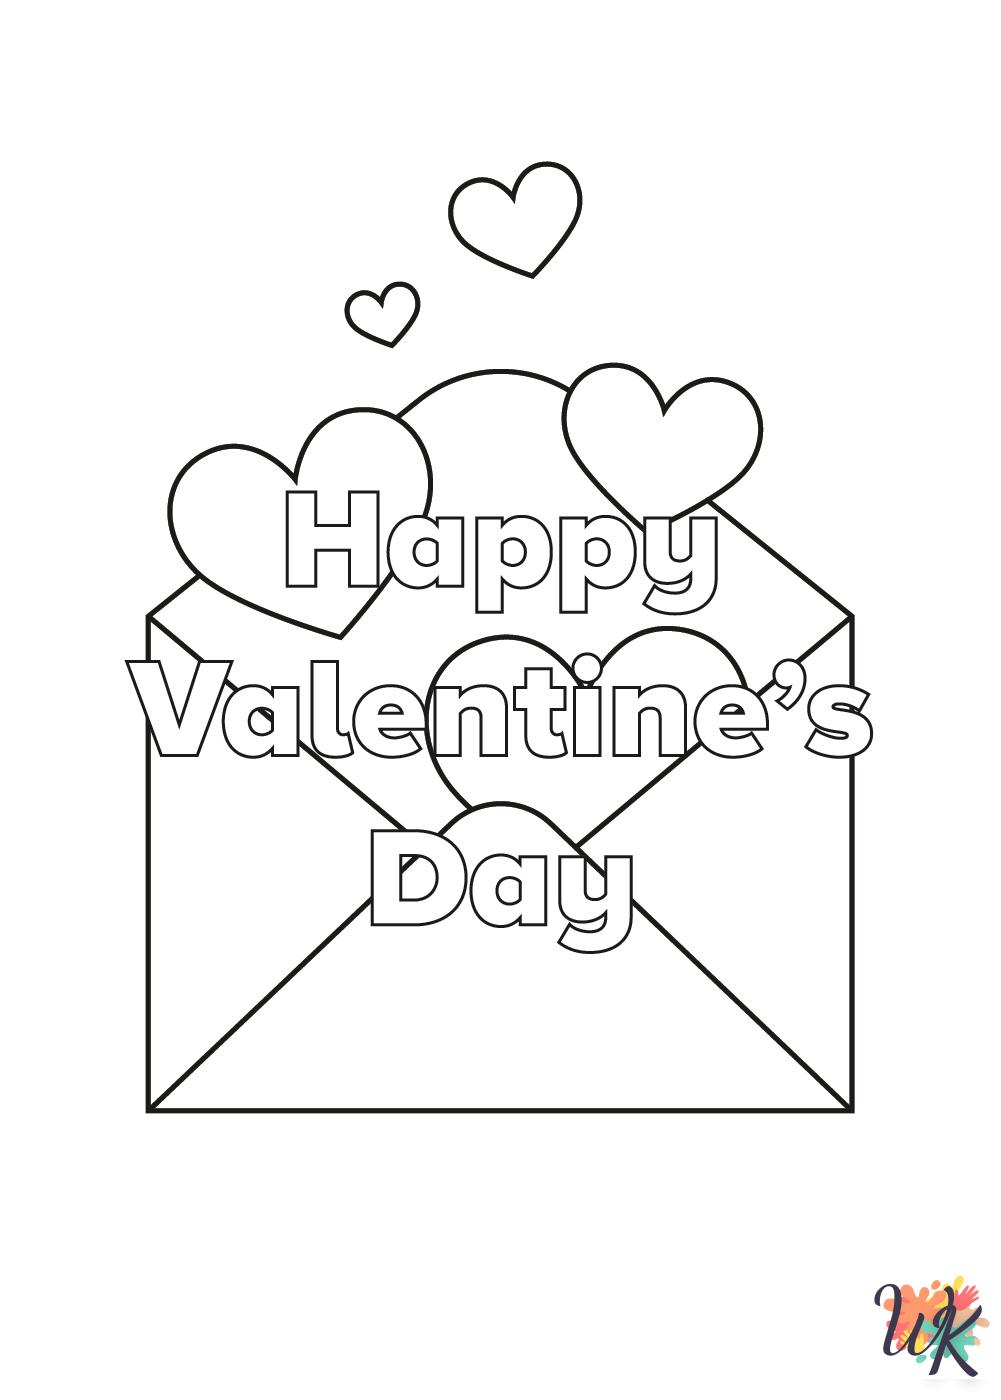 Valentine's Day coloring pages pdf